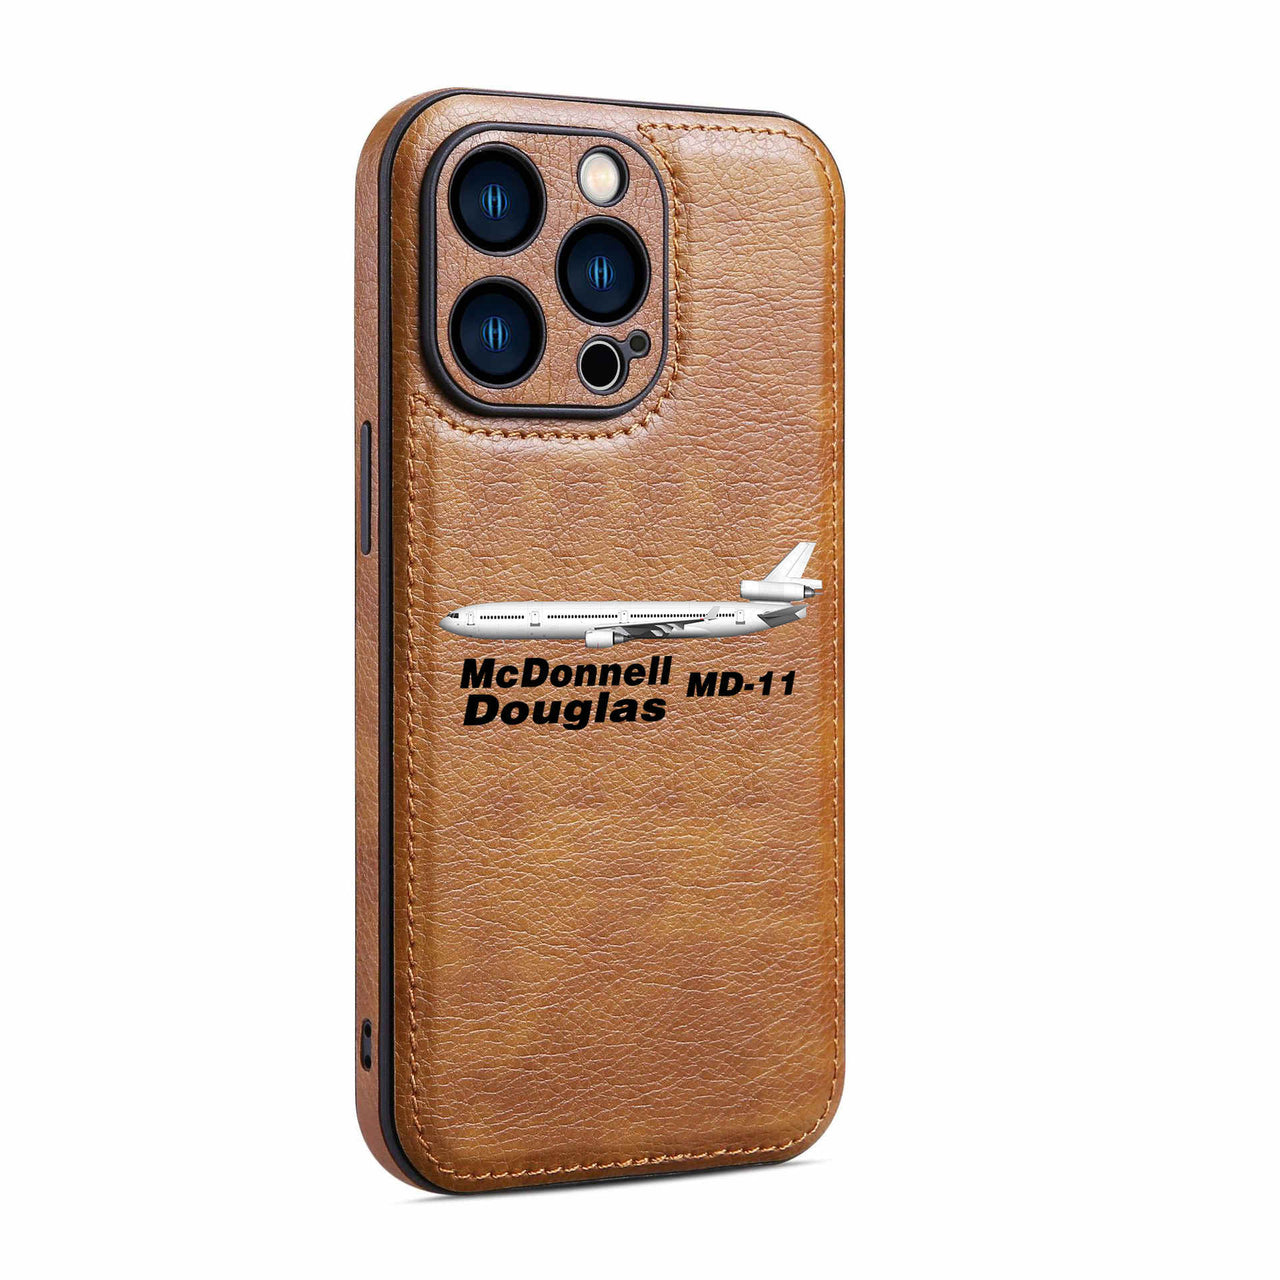 The McDonnell Douglas MD-11 Designed Leather iPhone Cases